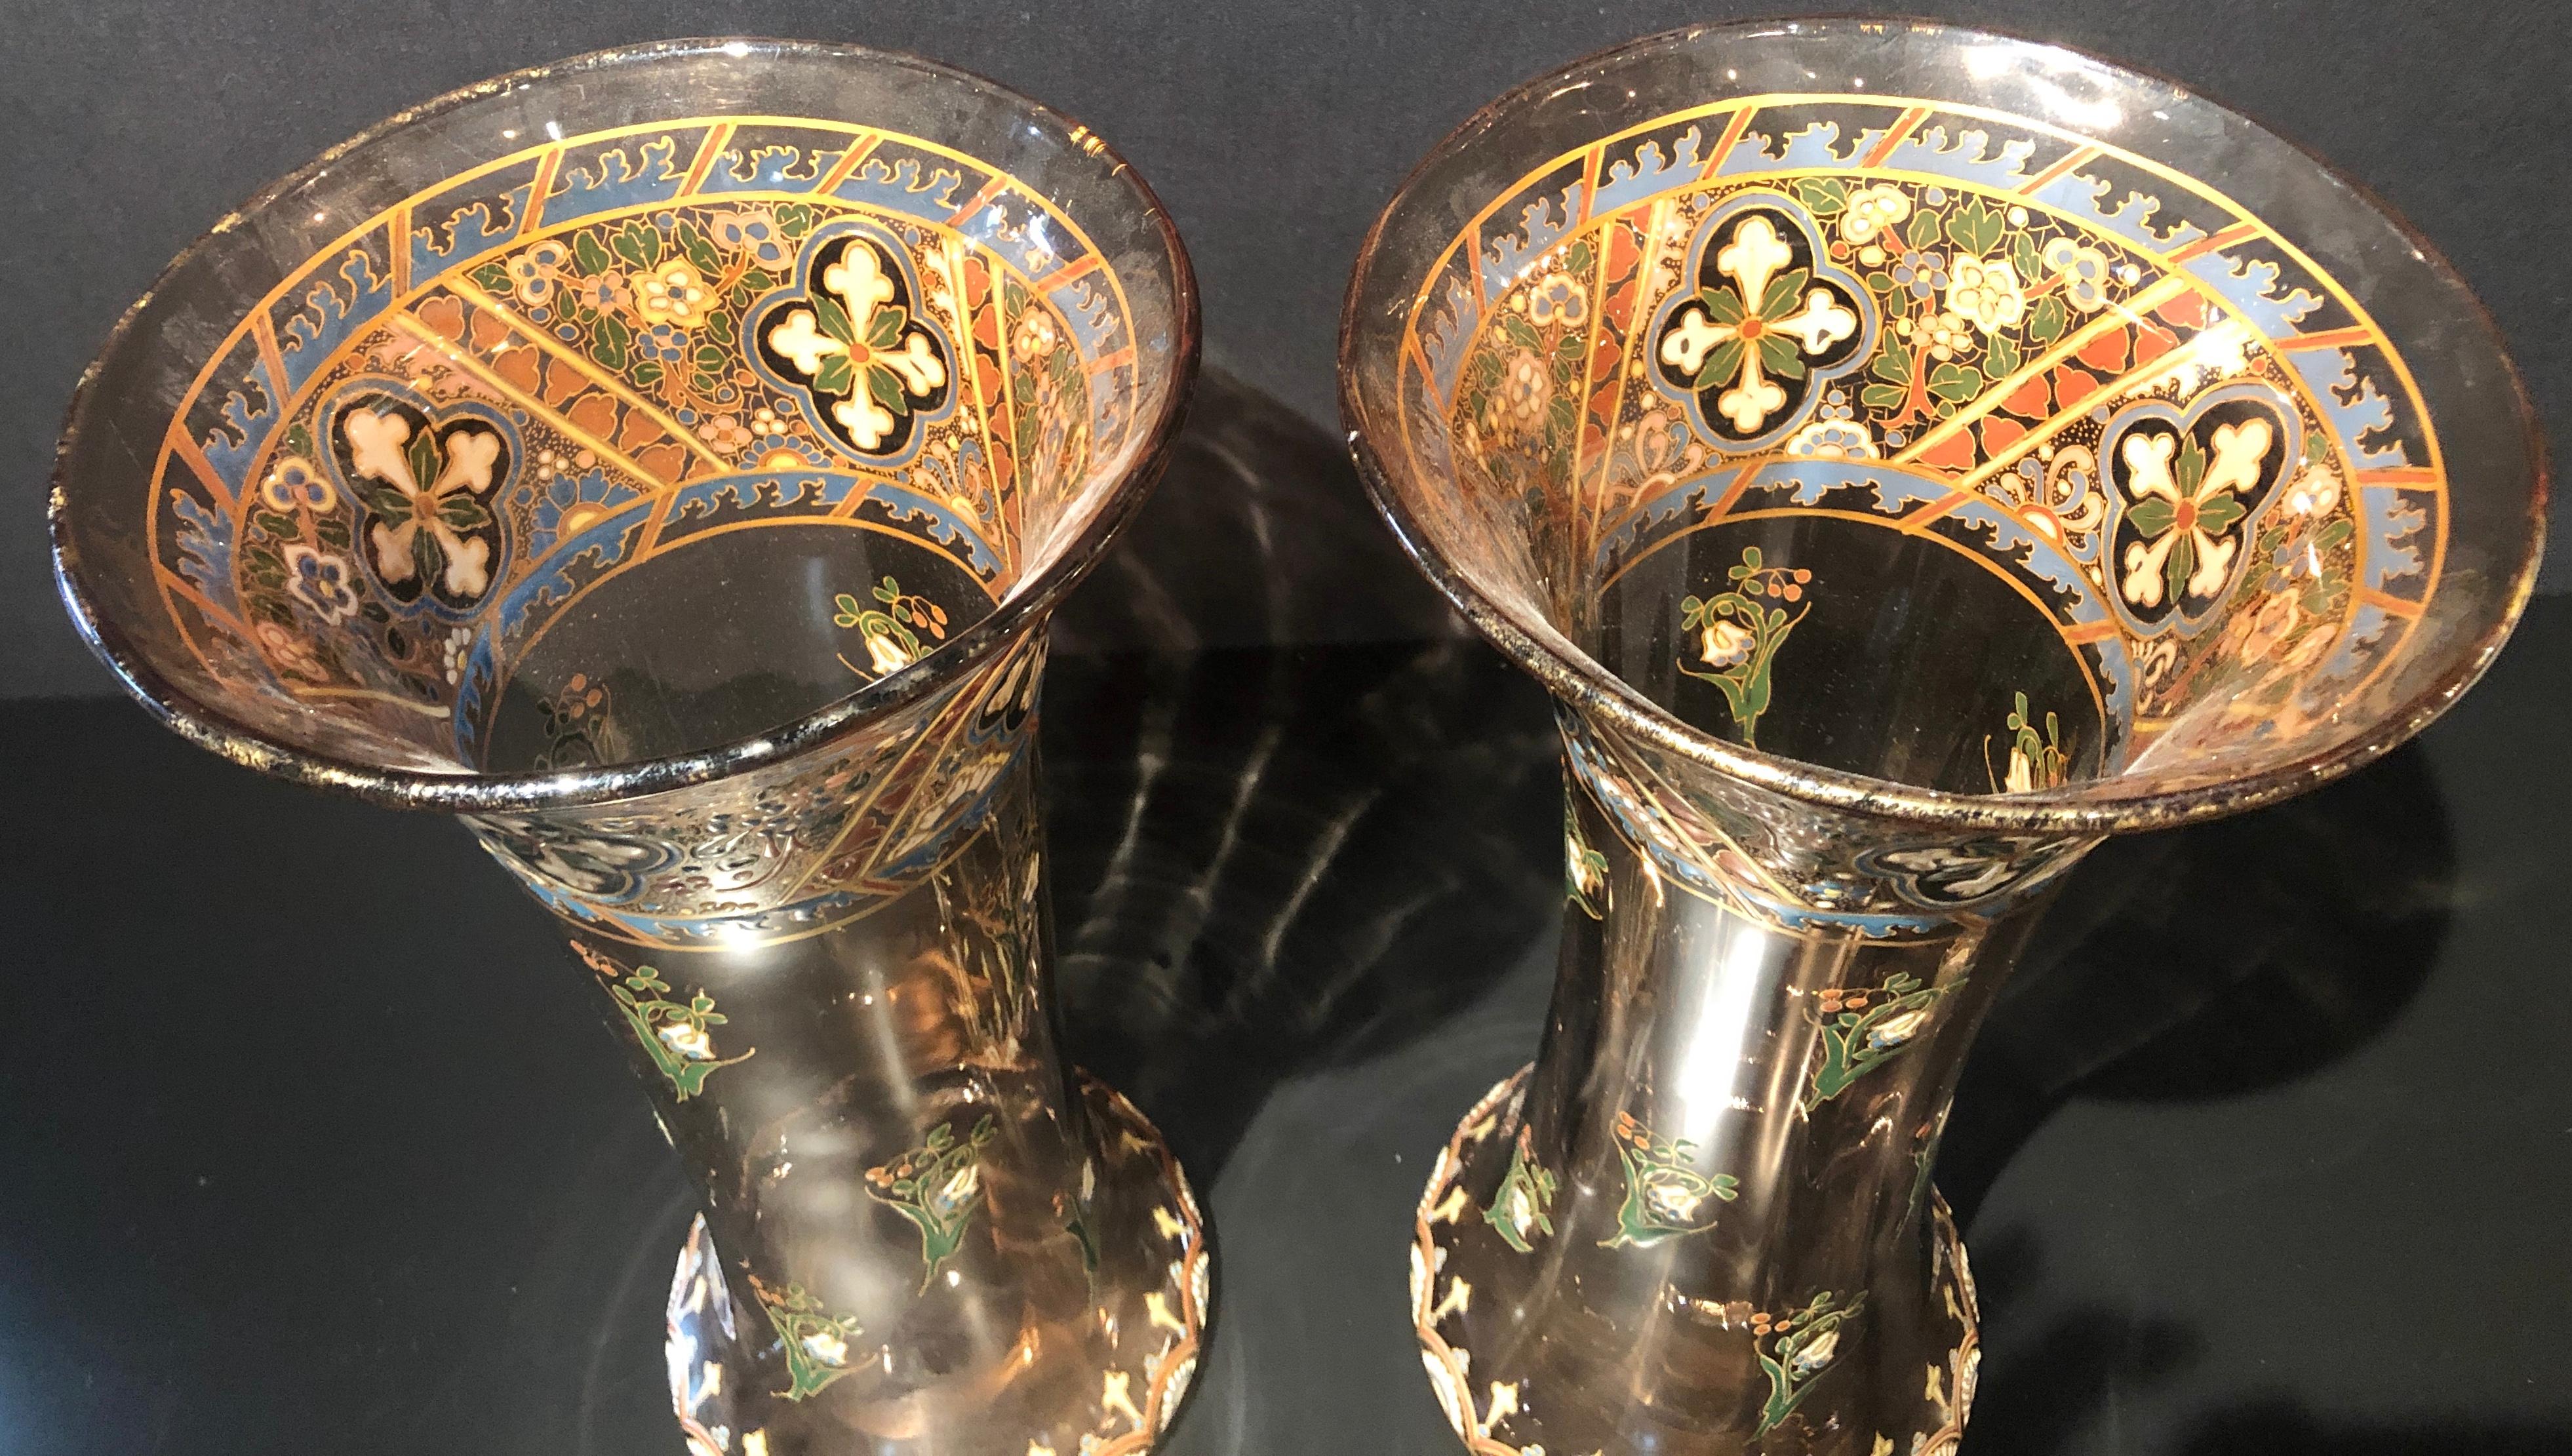 Pair of Antique Palatial French Jeweled Vases or Urns Emile Galle Style  For Sale 13